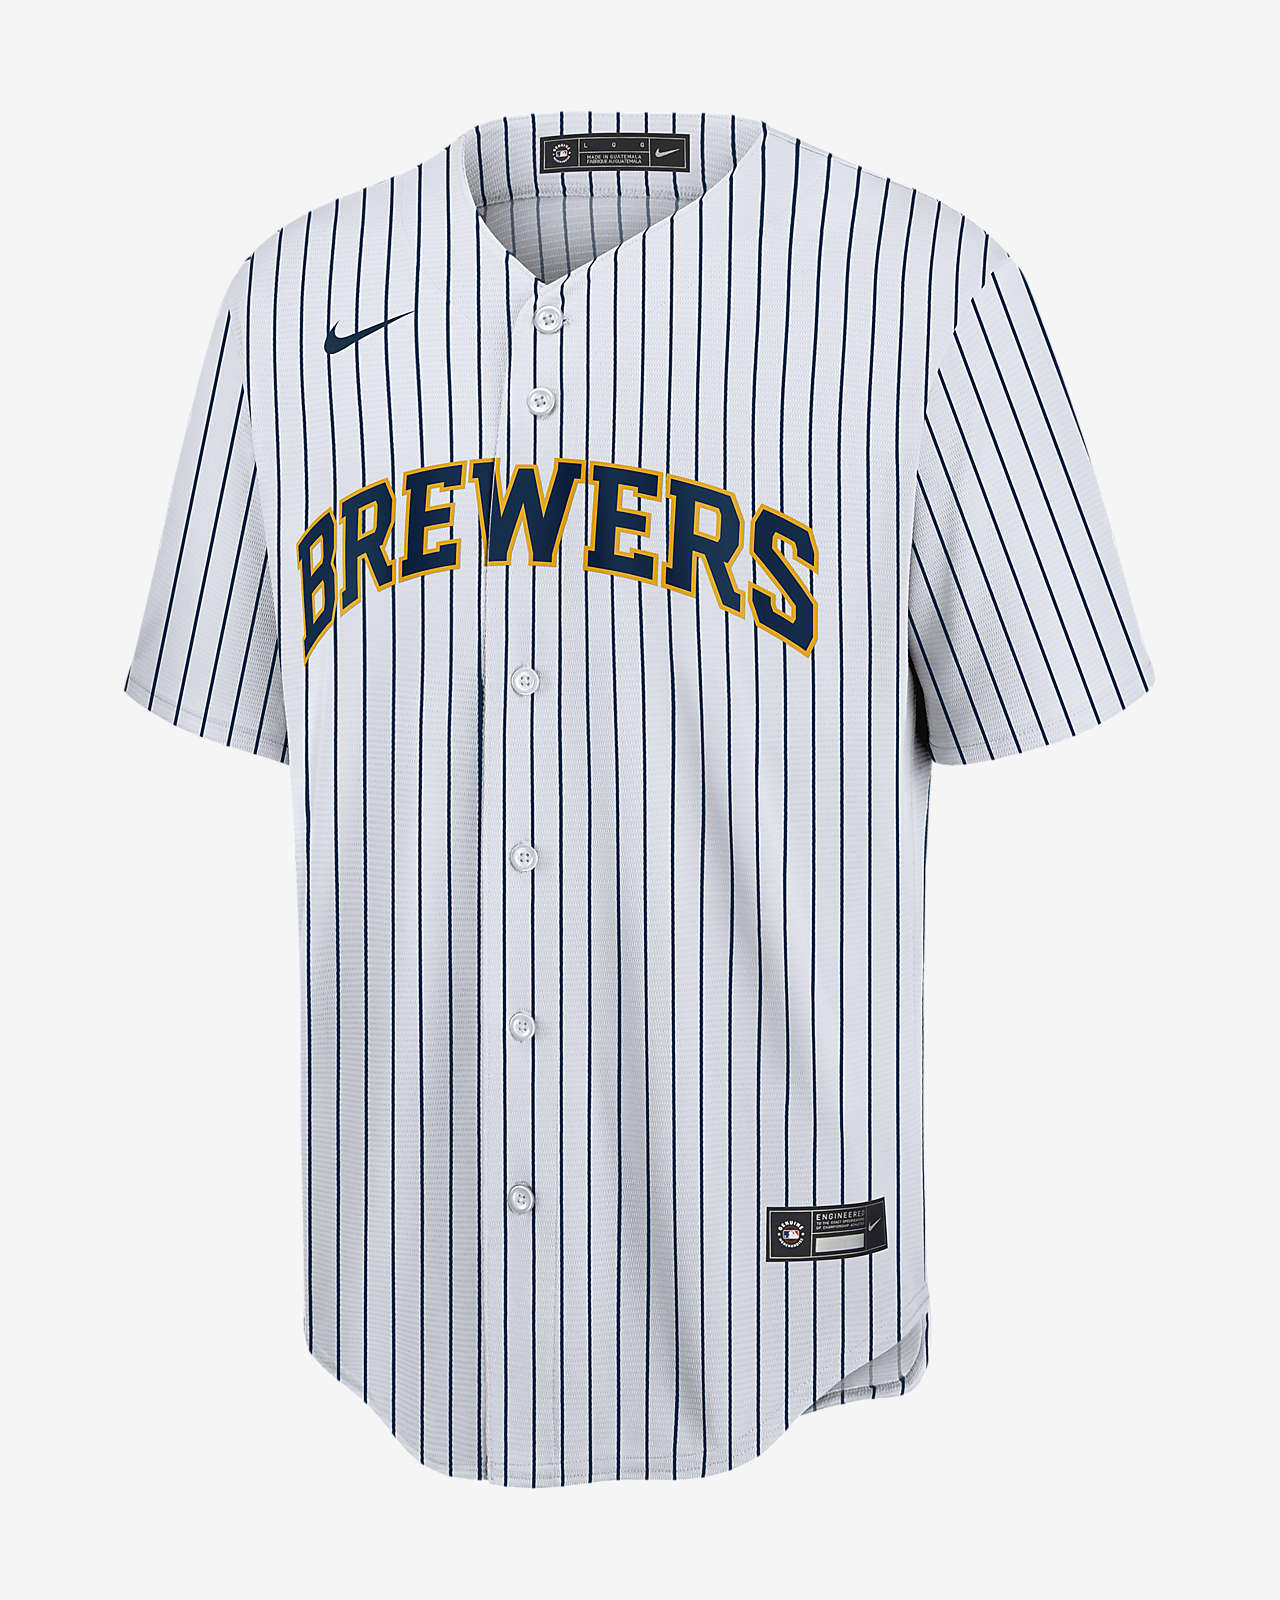 toddler brewers jersey